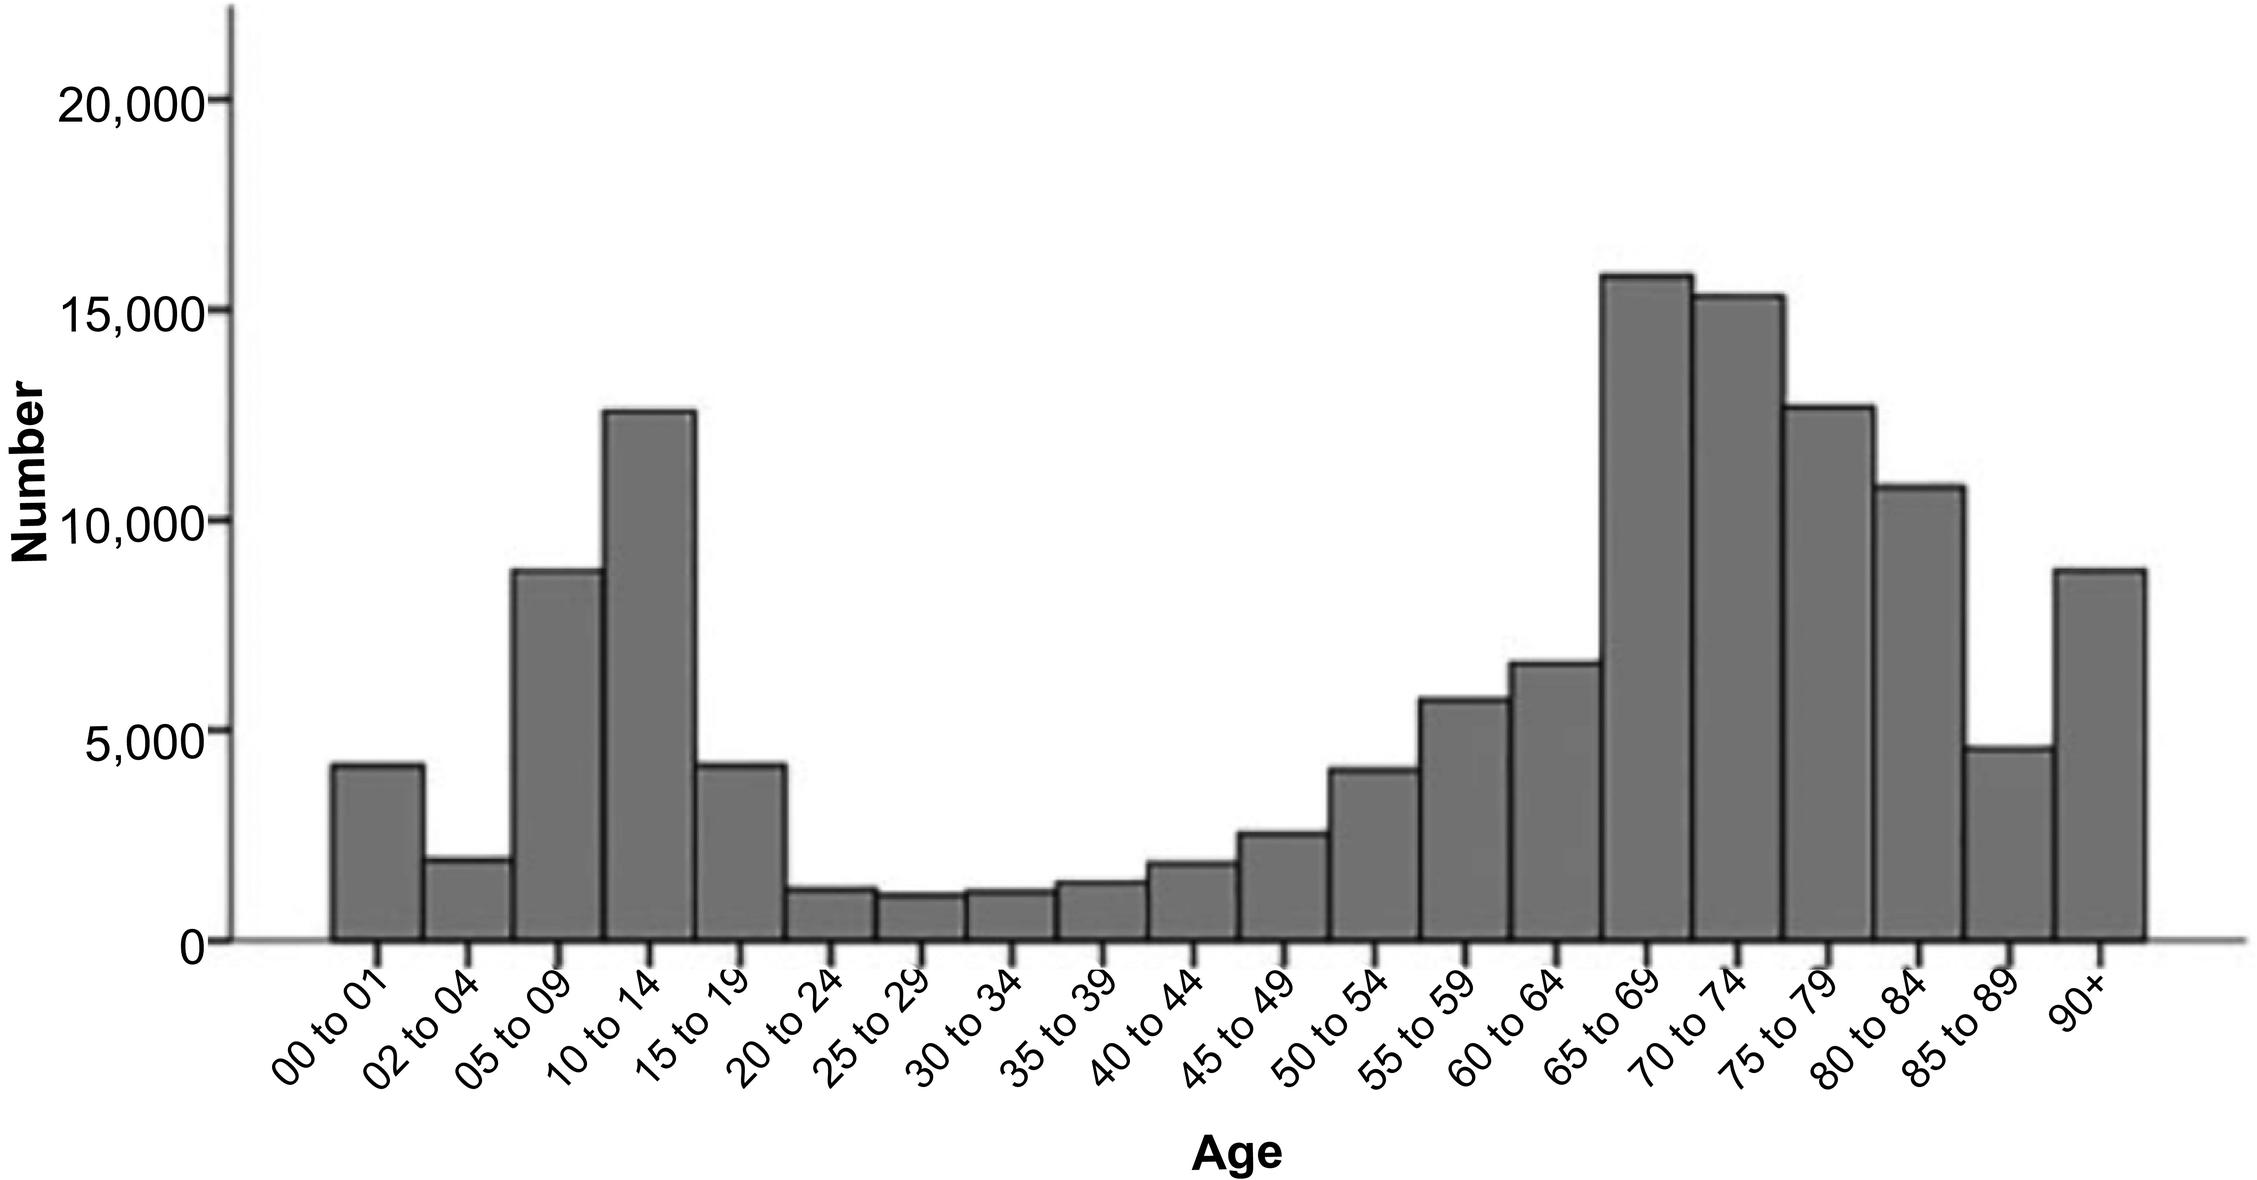 Fig. 1, Distal radius fracture distribution by age group.